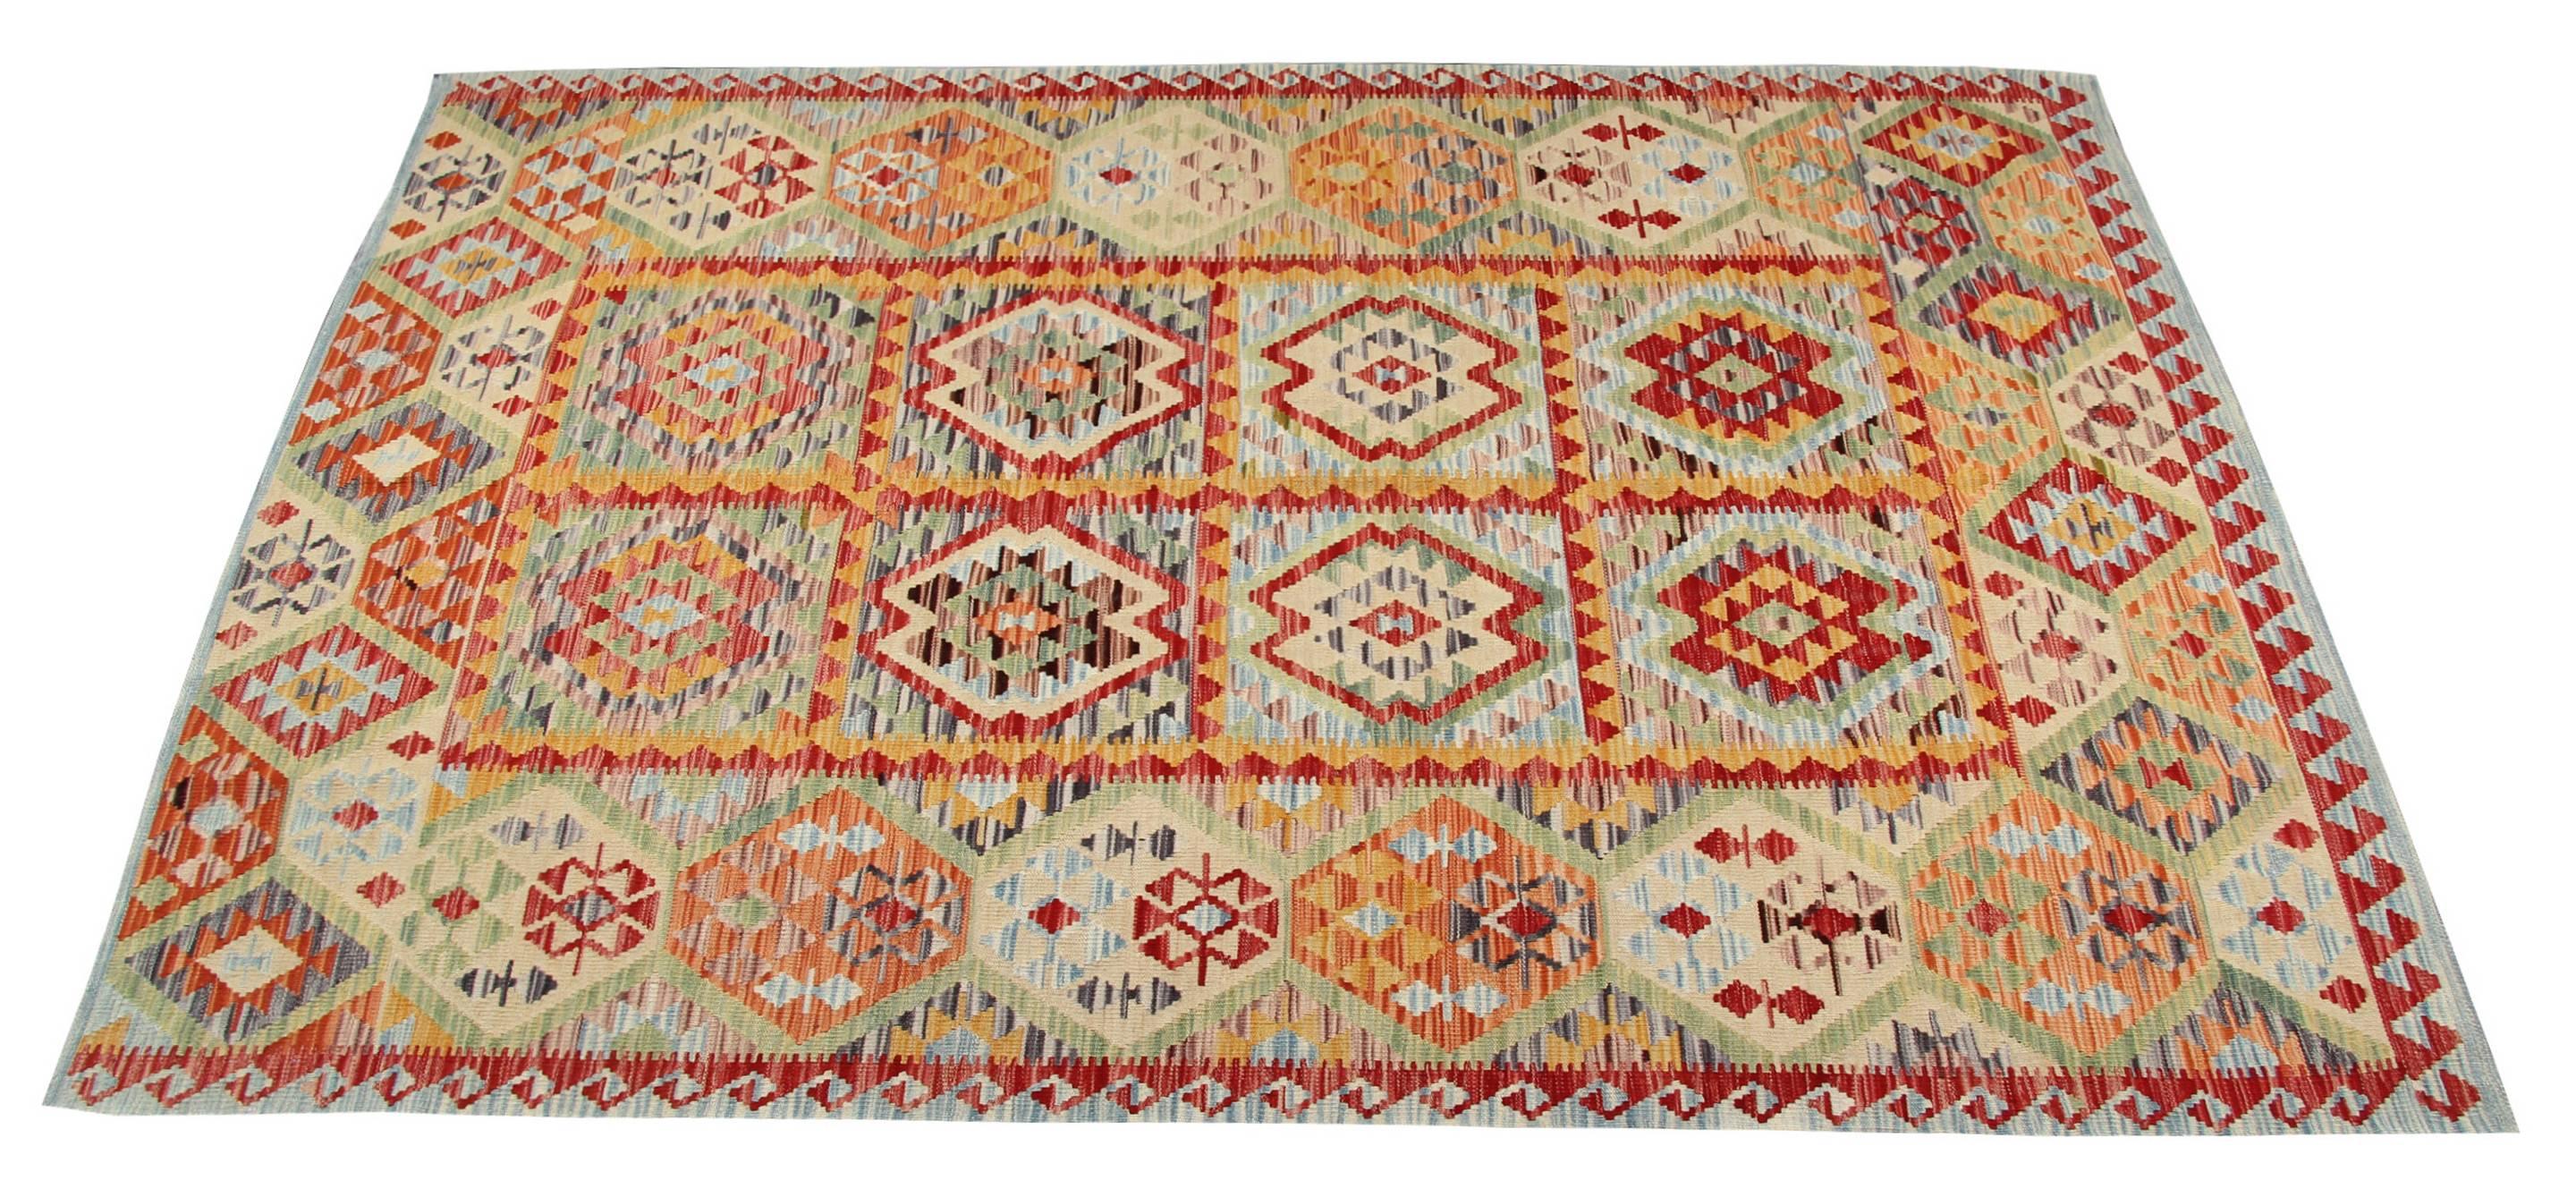 This new traditional Kilim rug is very fascinating. In fact, it reports the designs of the traditions but the manufacture is new: it was handmade in Afghanistan and uses tribal motifs. The Kilim is called 'Floral' because it reports symbols which